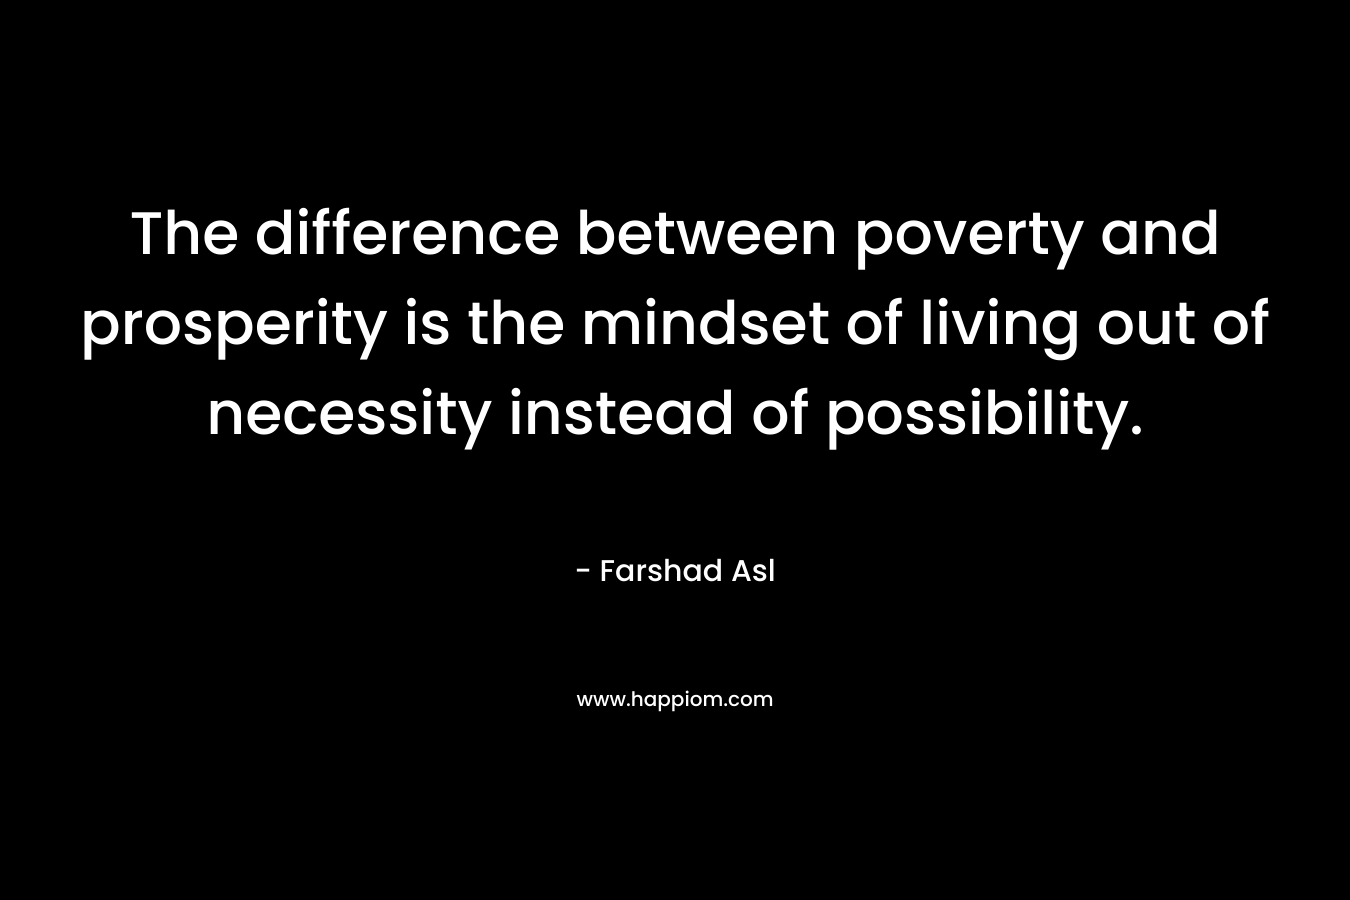 The difference between poverty and prosperity is the mindset of living out of necessity instead of possibility.